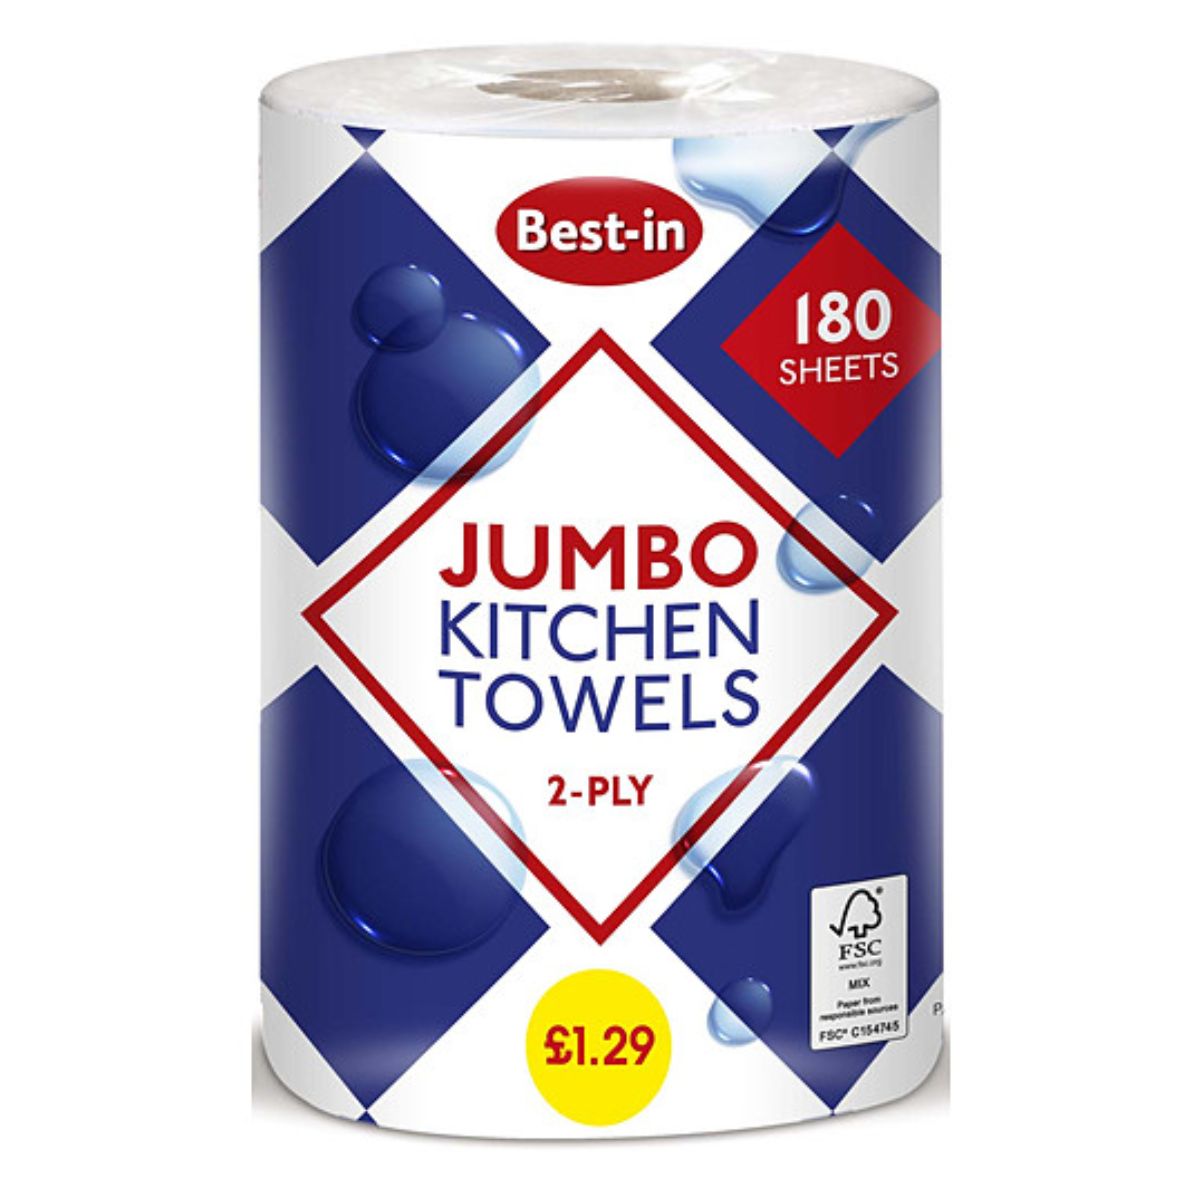 A pack of Best In - Jumbo Kitchen Towel 2ply White with 180 sheets priced at £1.29.